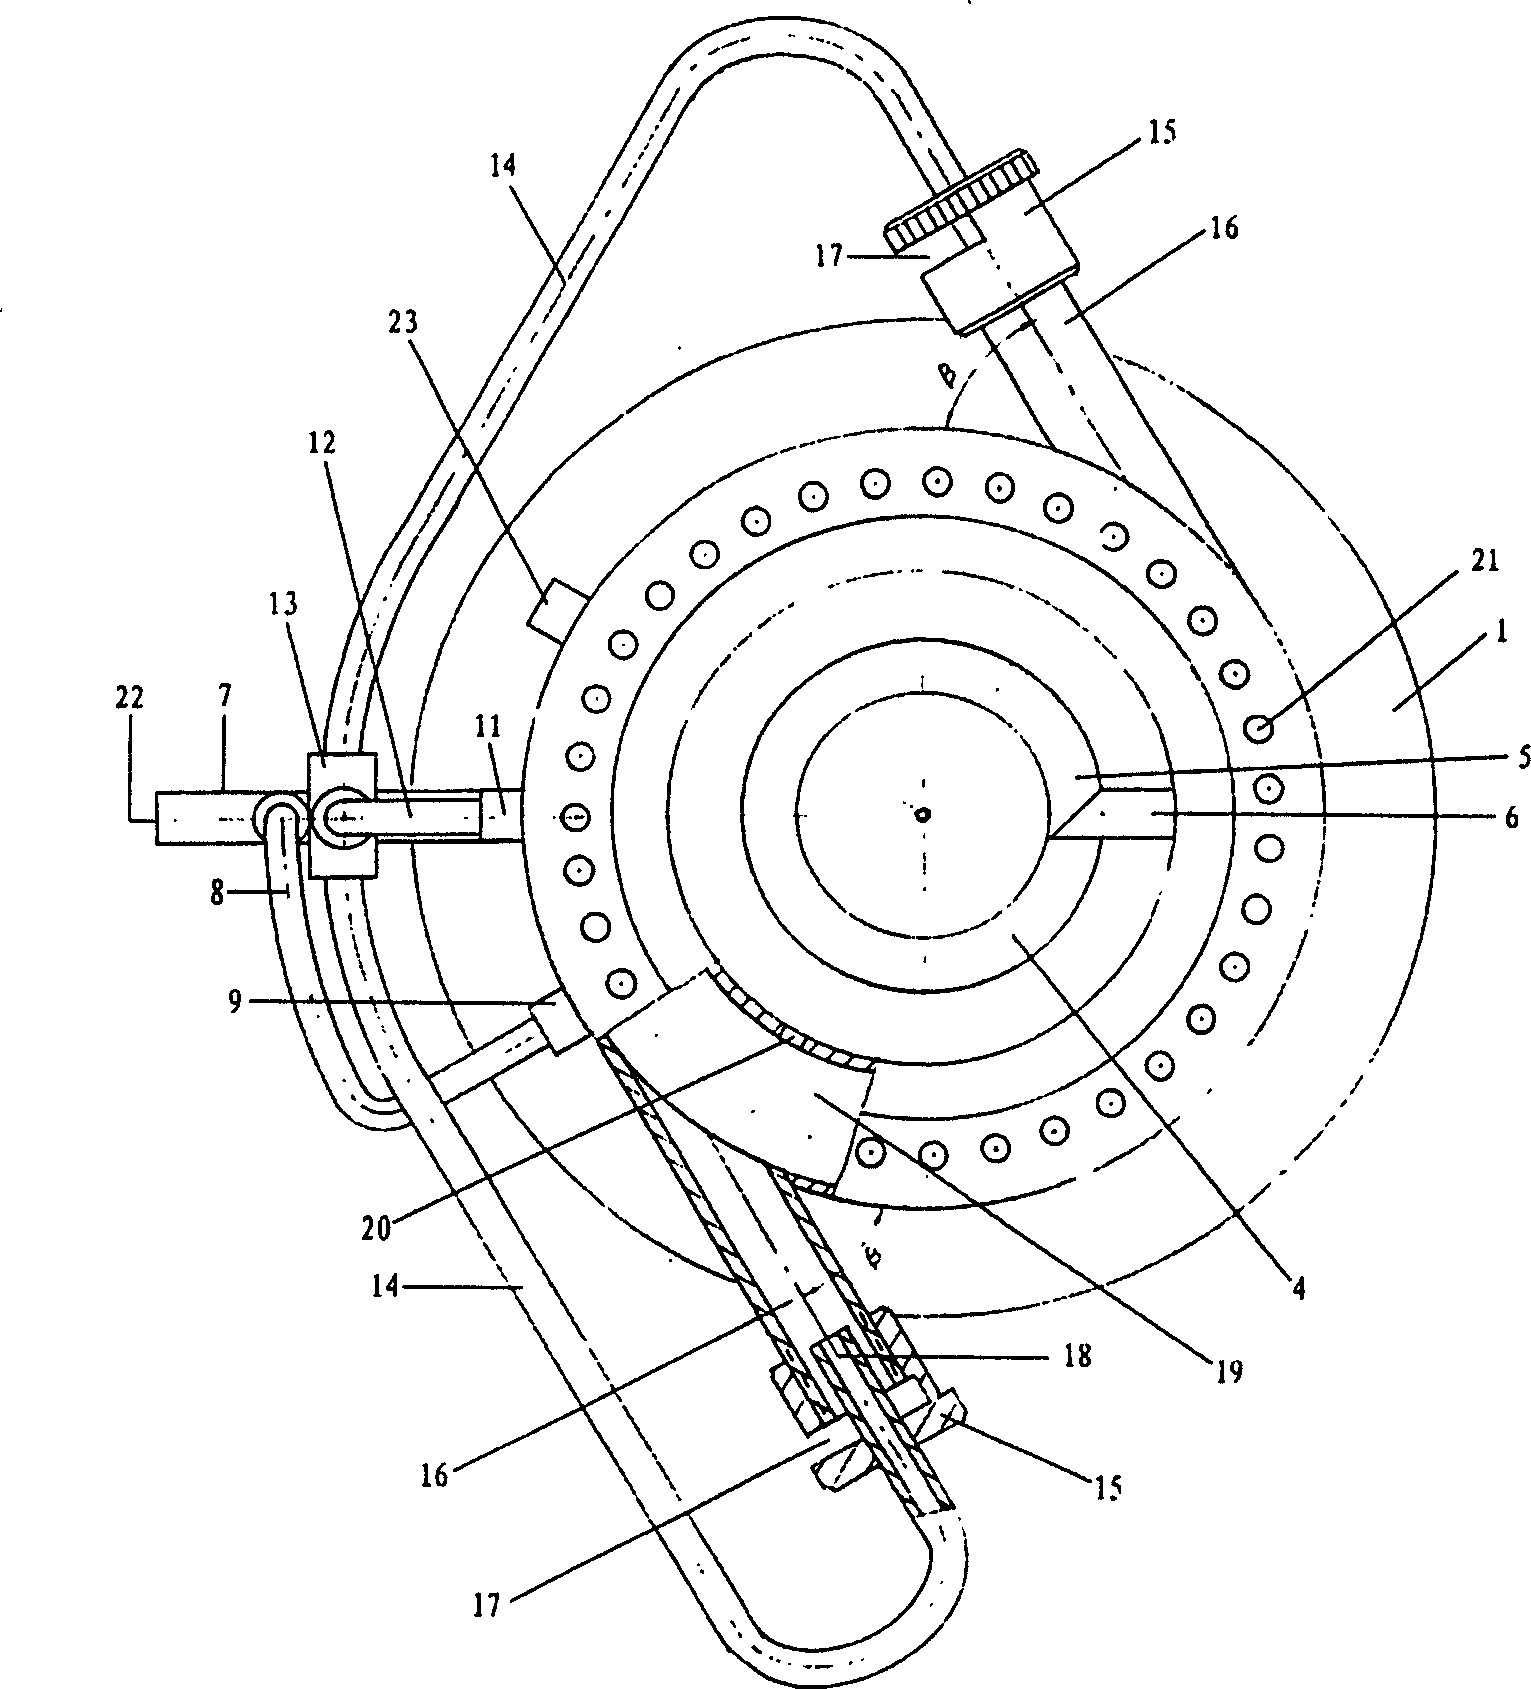 Liquid fuel evaporation and combustion furnace head